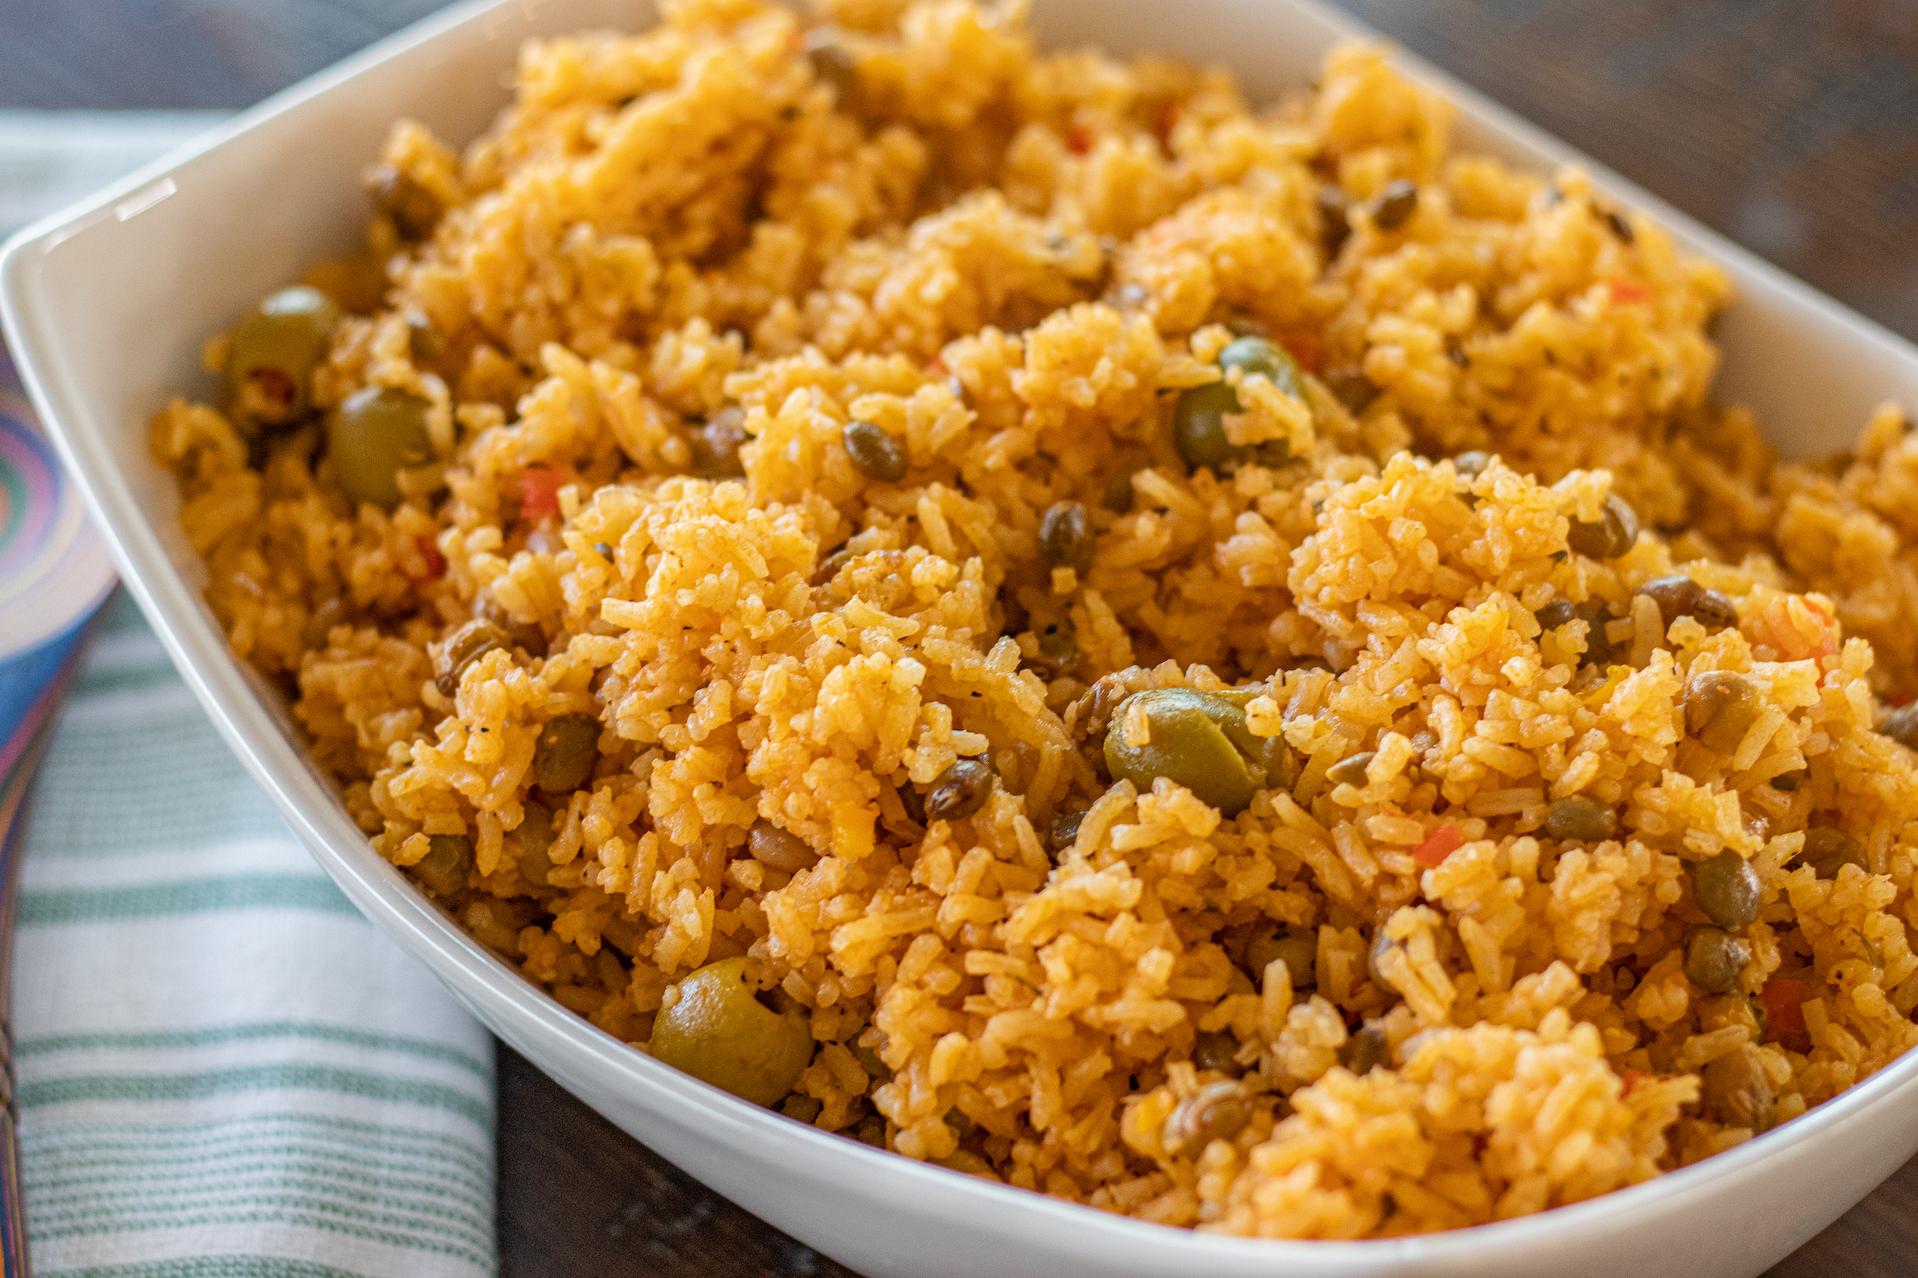  The perfect combination of rice and pigeon peas, with delicious seasonings and spices in every bite.